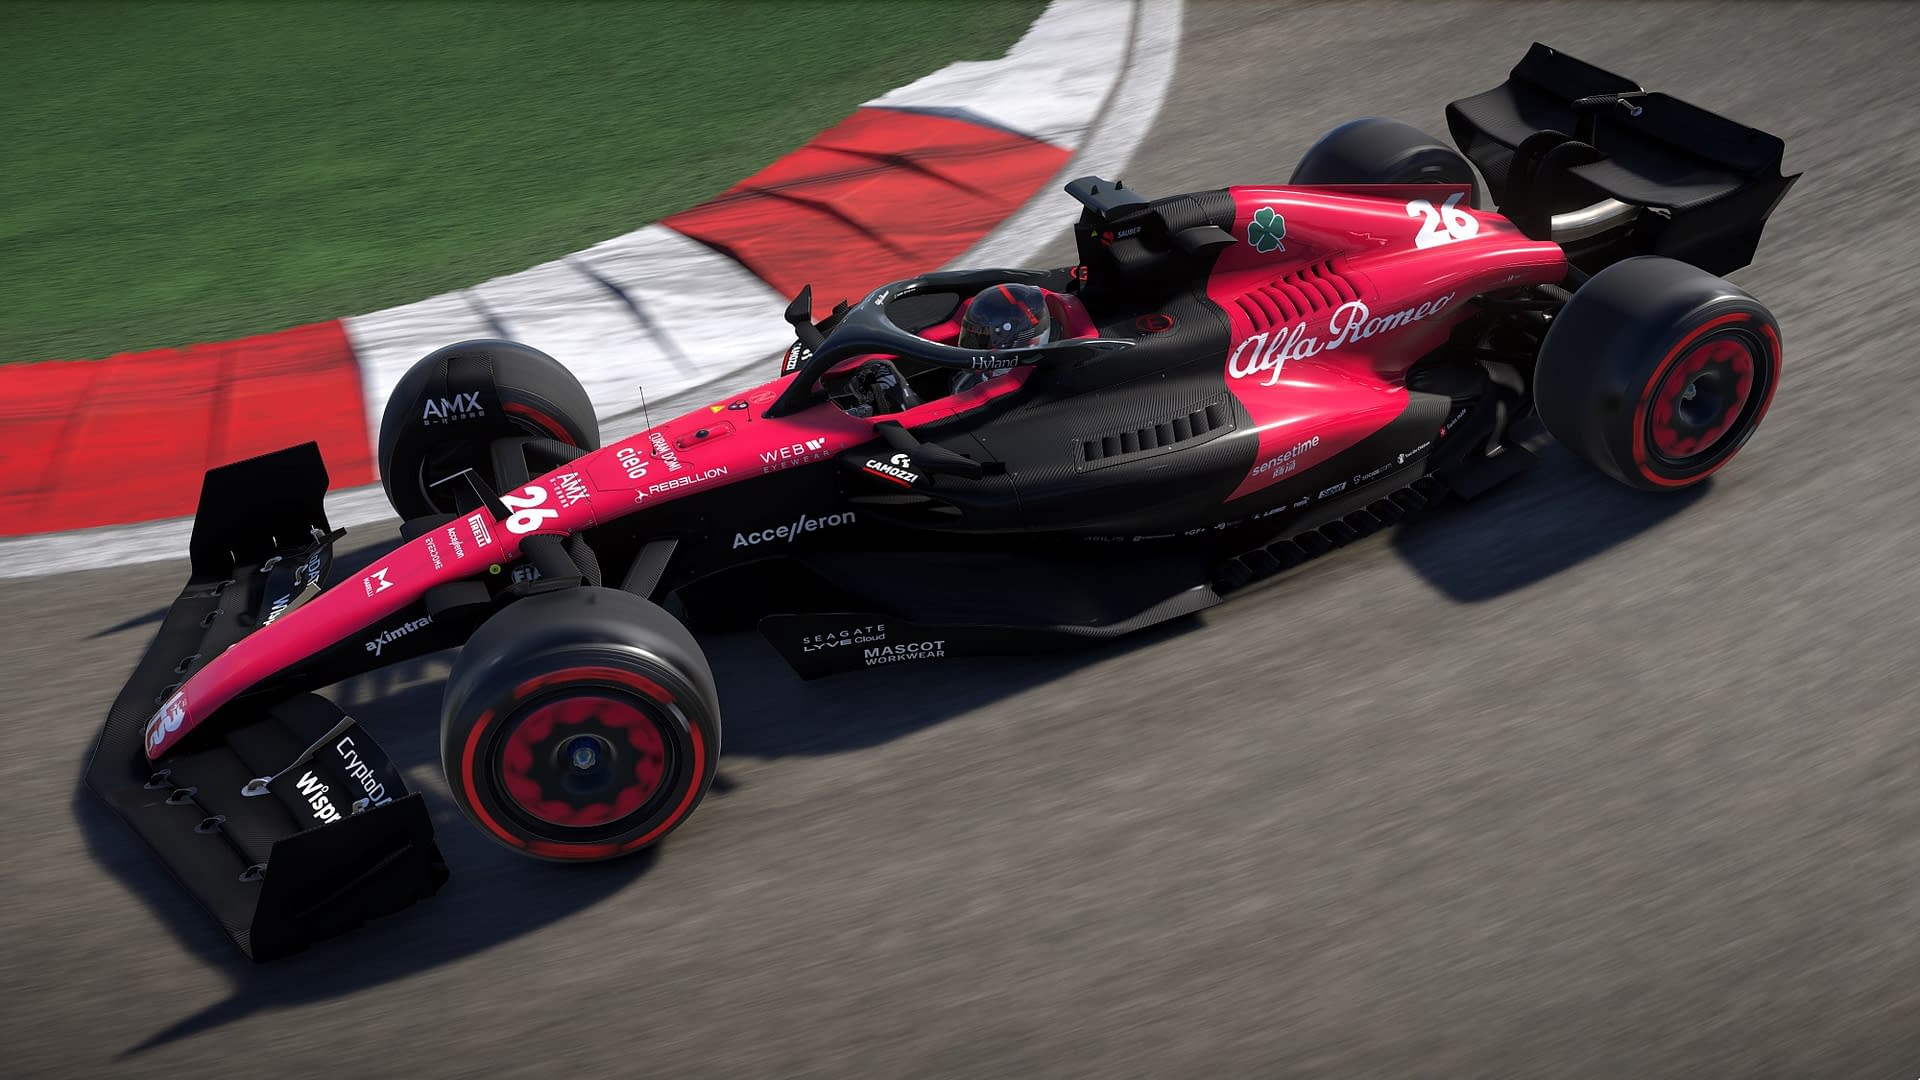 EA and Codemasters announce F1 22 release date and brand-new game additions  – including F1 Life